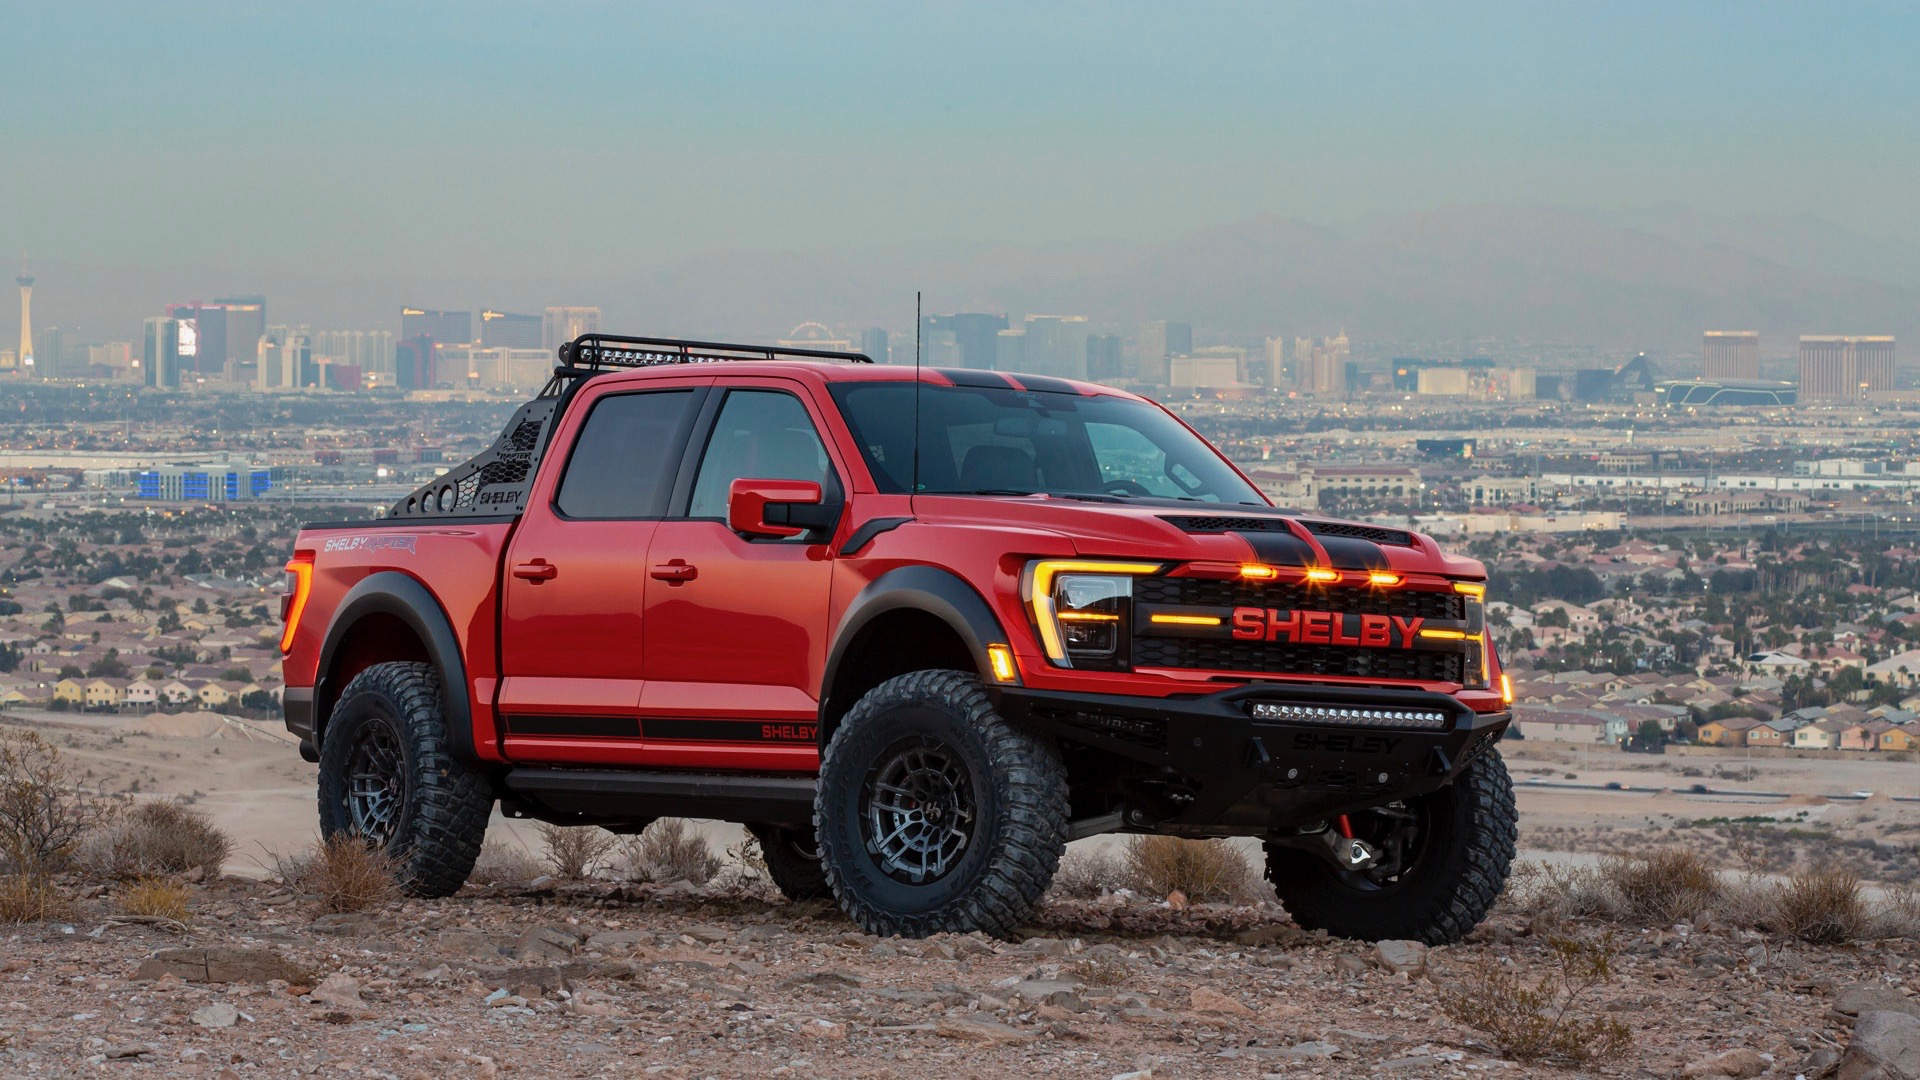 2022 Ford Shelby Raptor arrives with 525 hp and more attitude